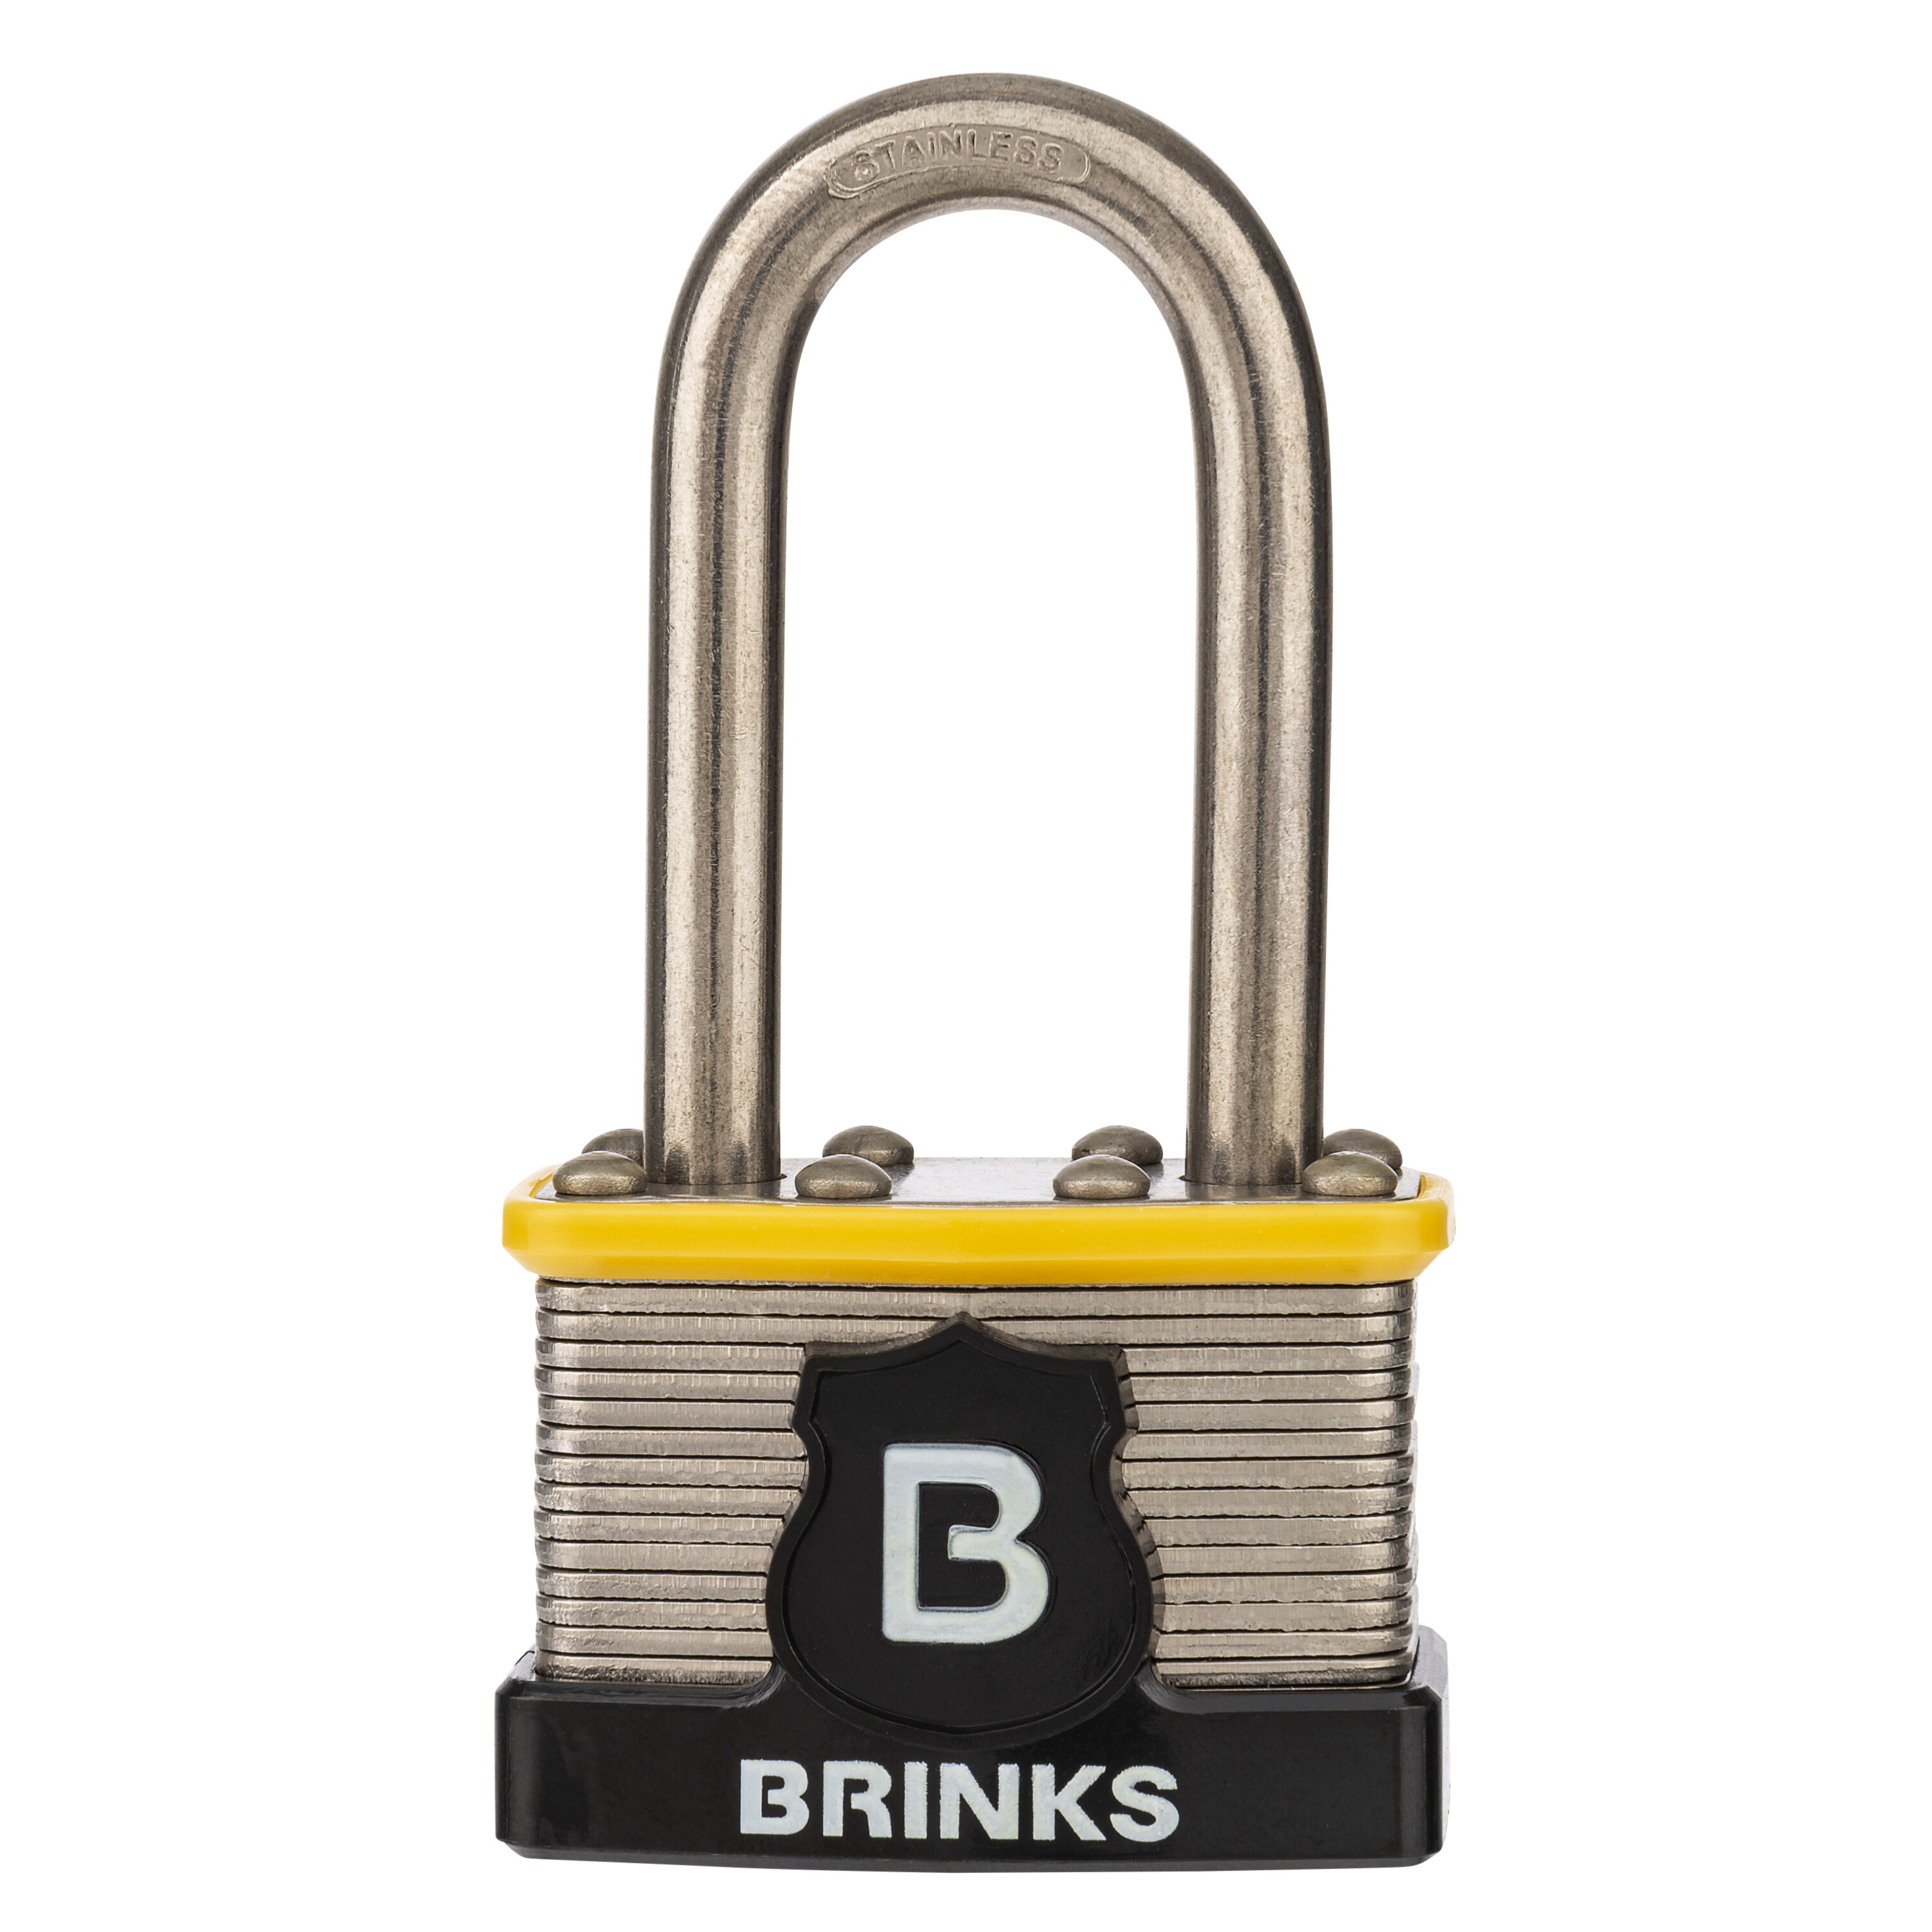 44mm Commercial Laminated Steel Keyed and Warded Padlock, 2